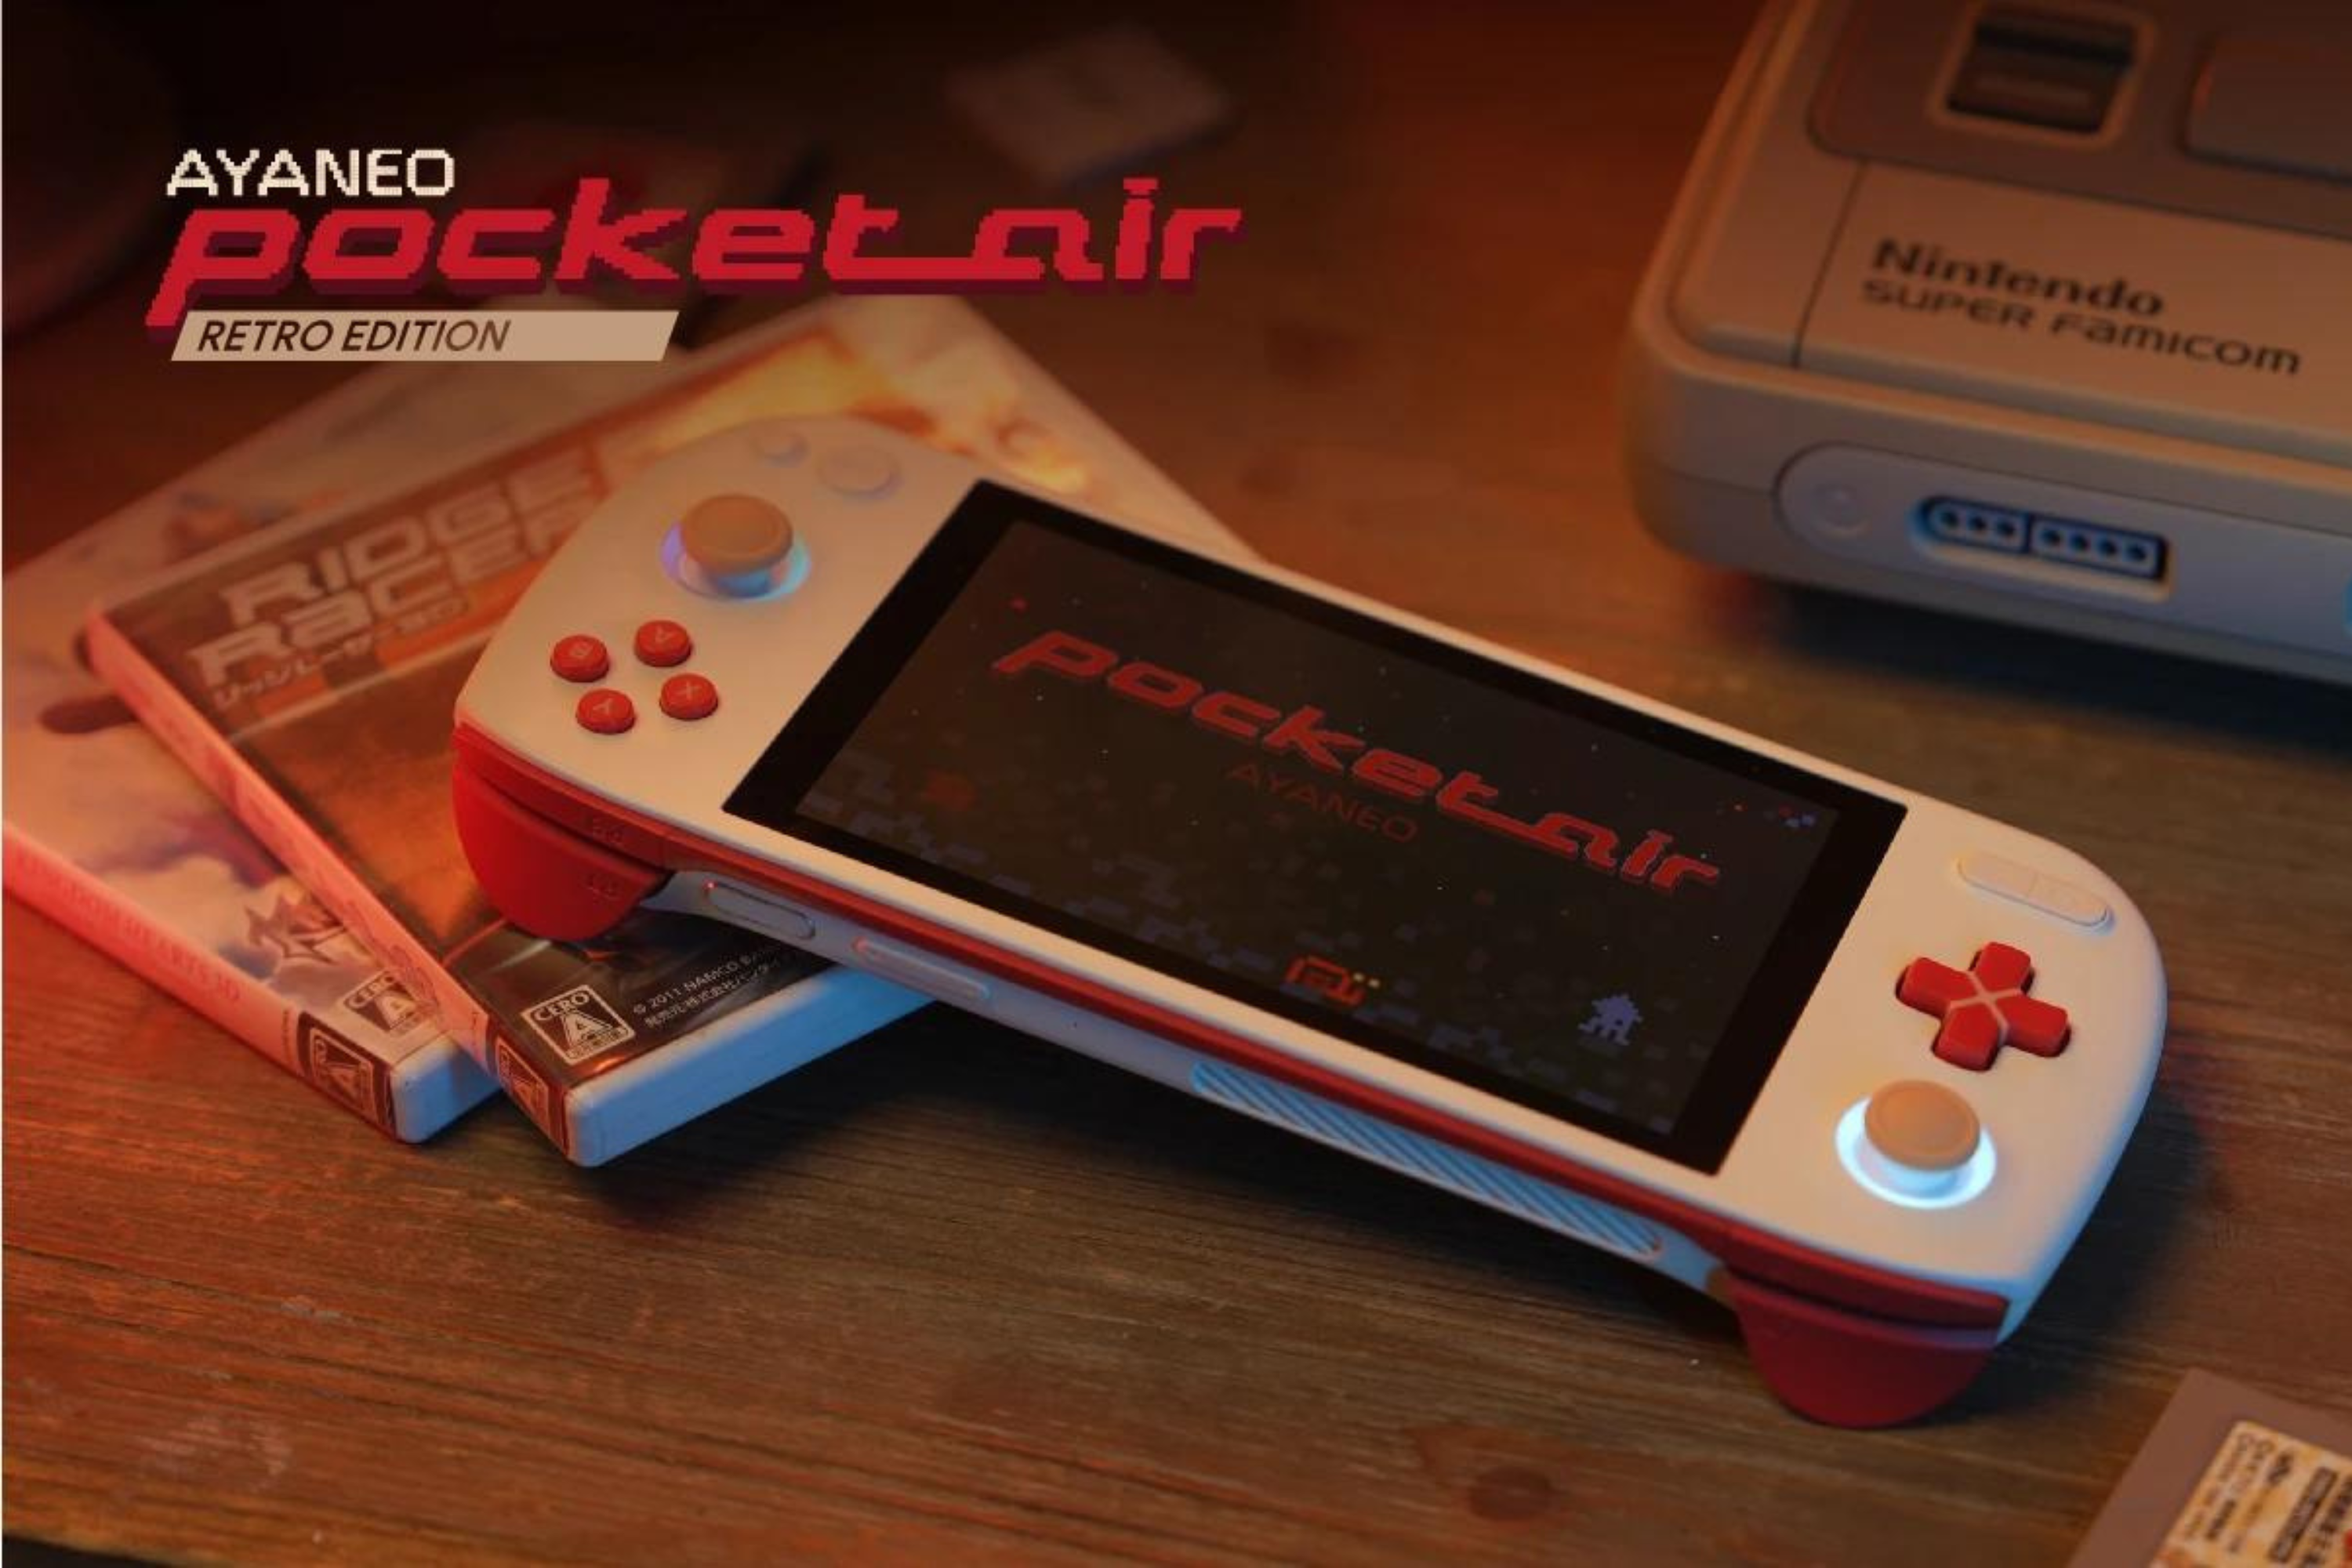 Ayaneo Pocket Air on table with retro games and consoles in background